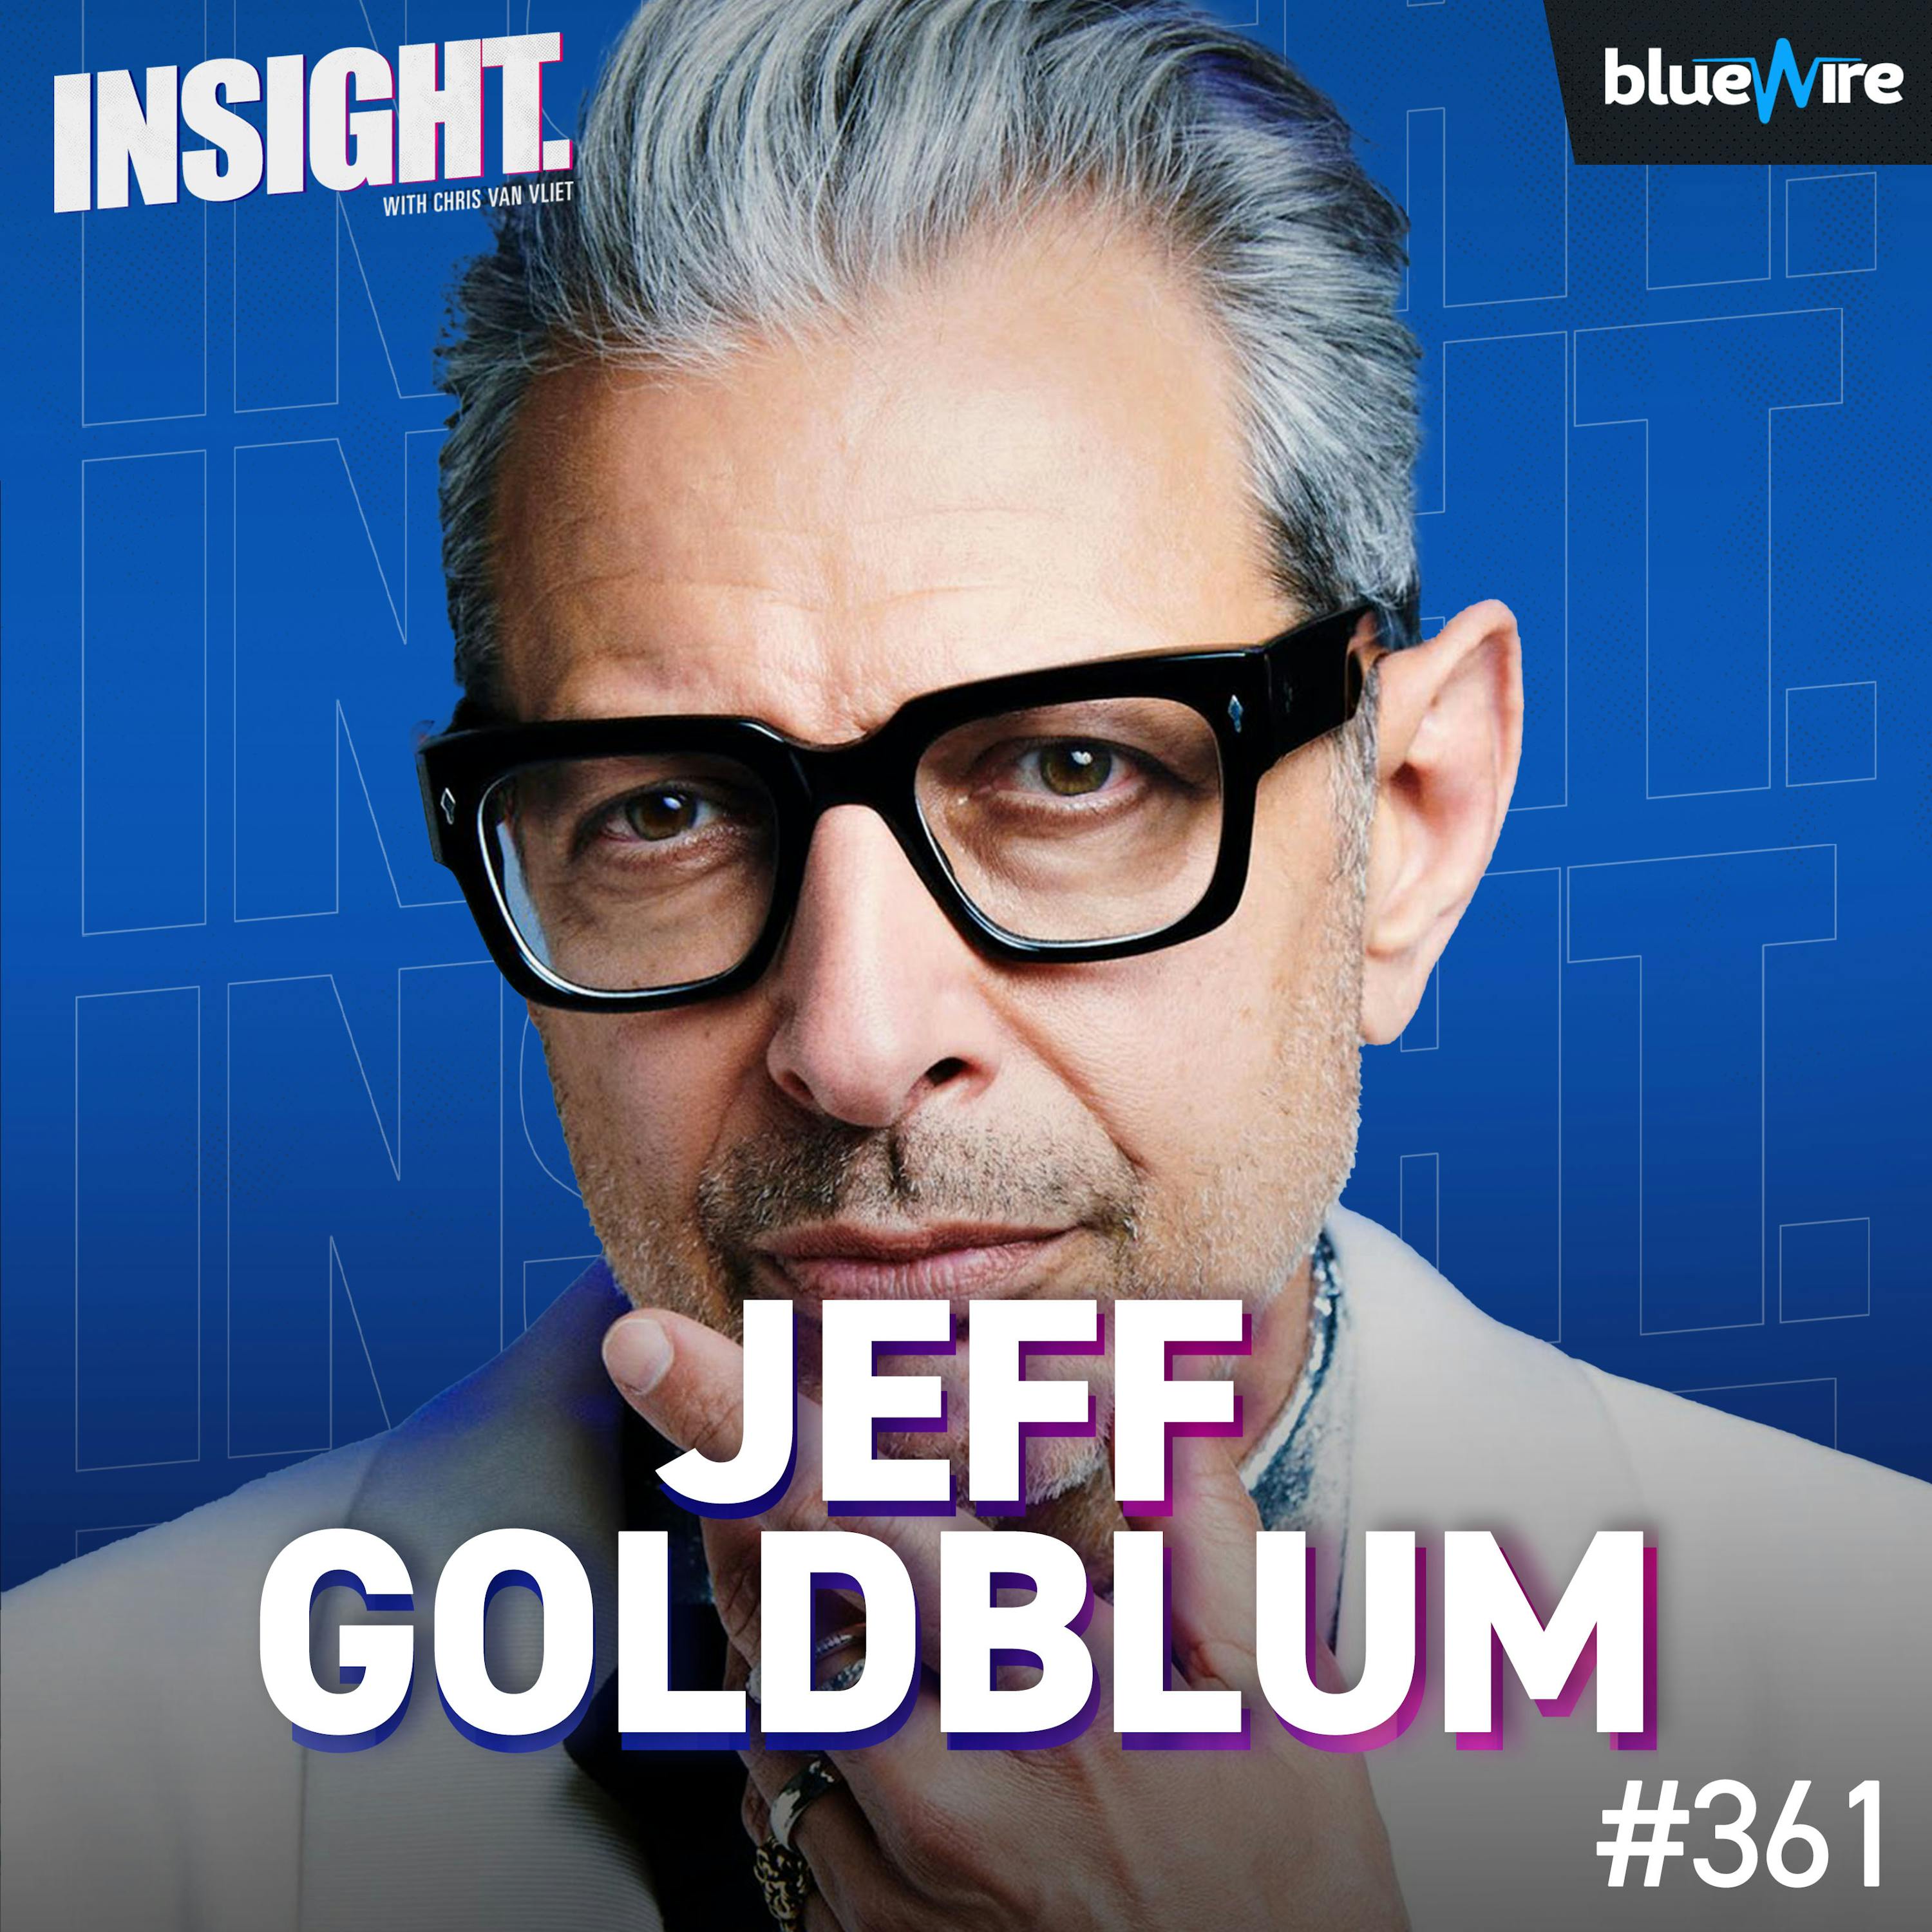 Jeff Goldblum Tells Me He Was Almost Cut Out Of The First Jurassic Park Movie!